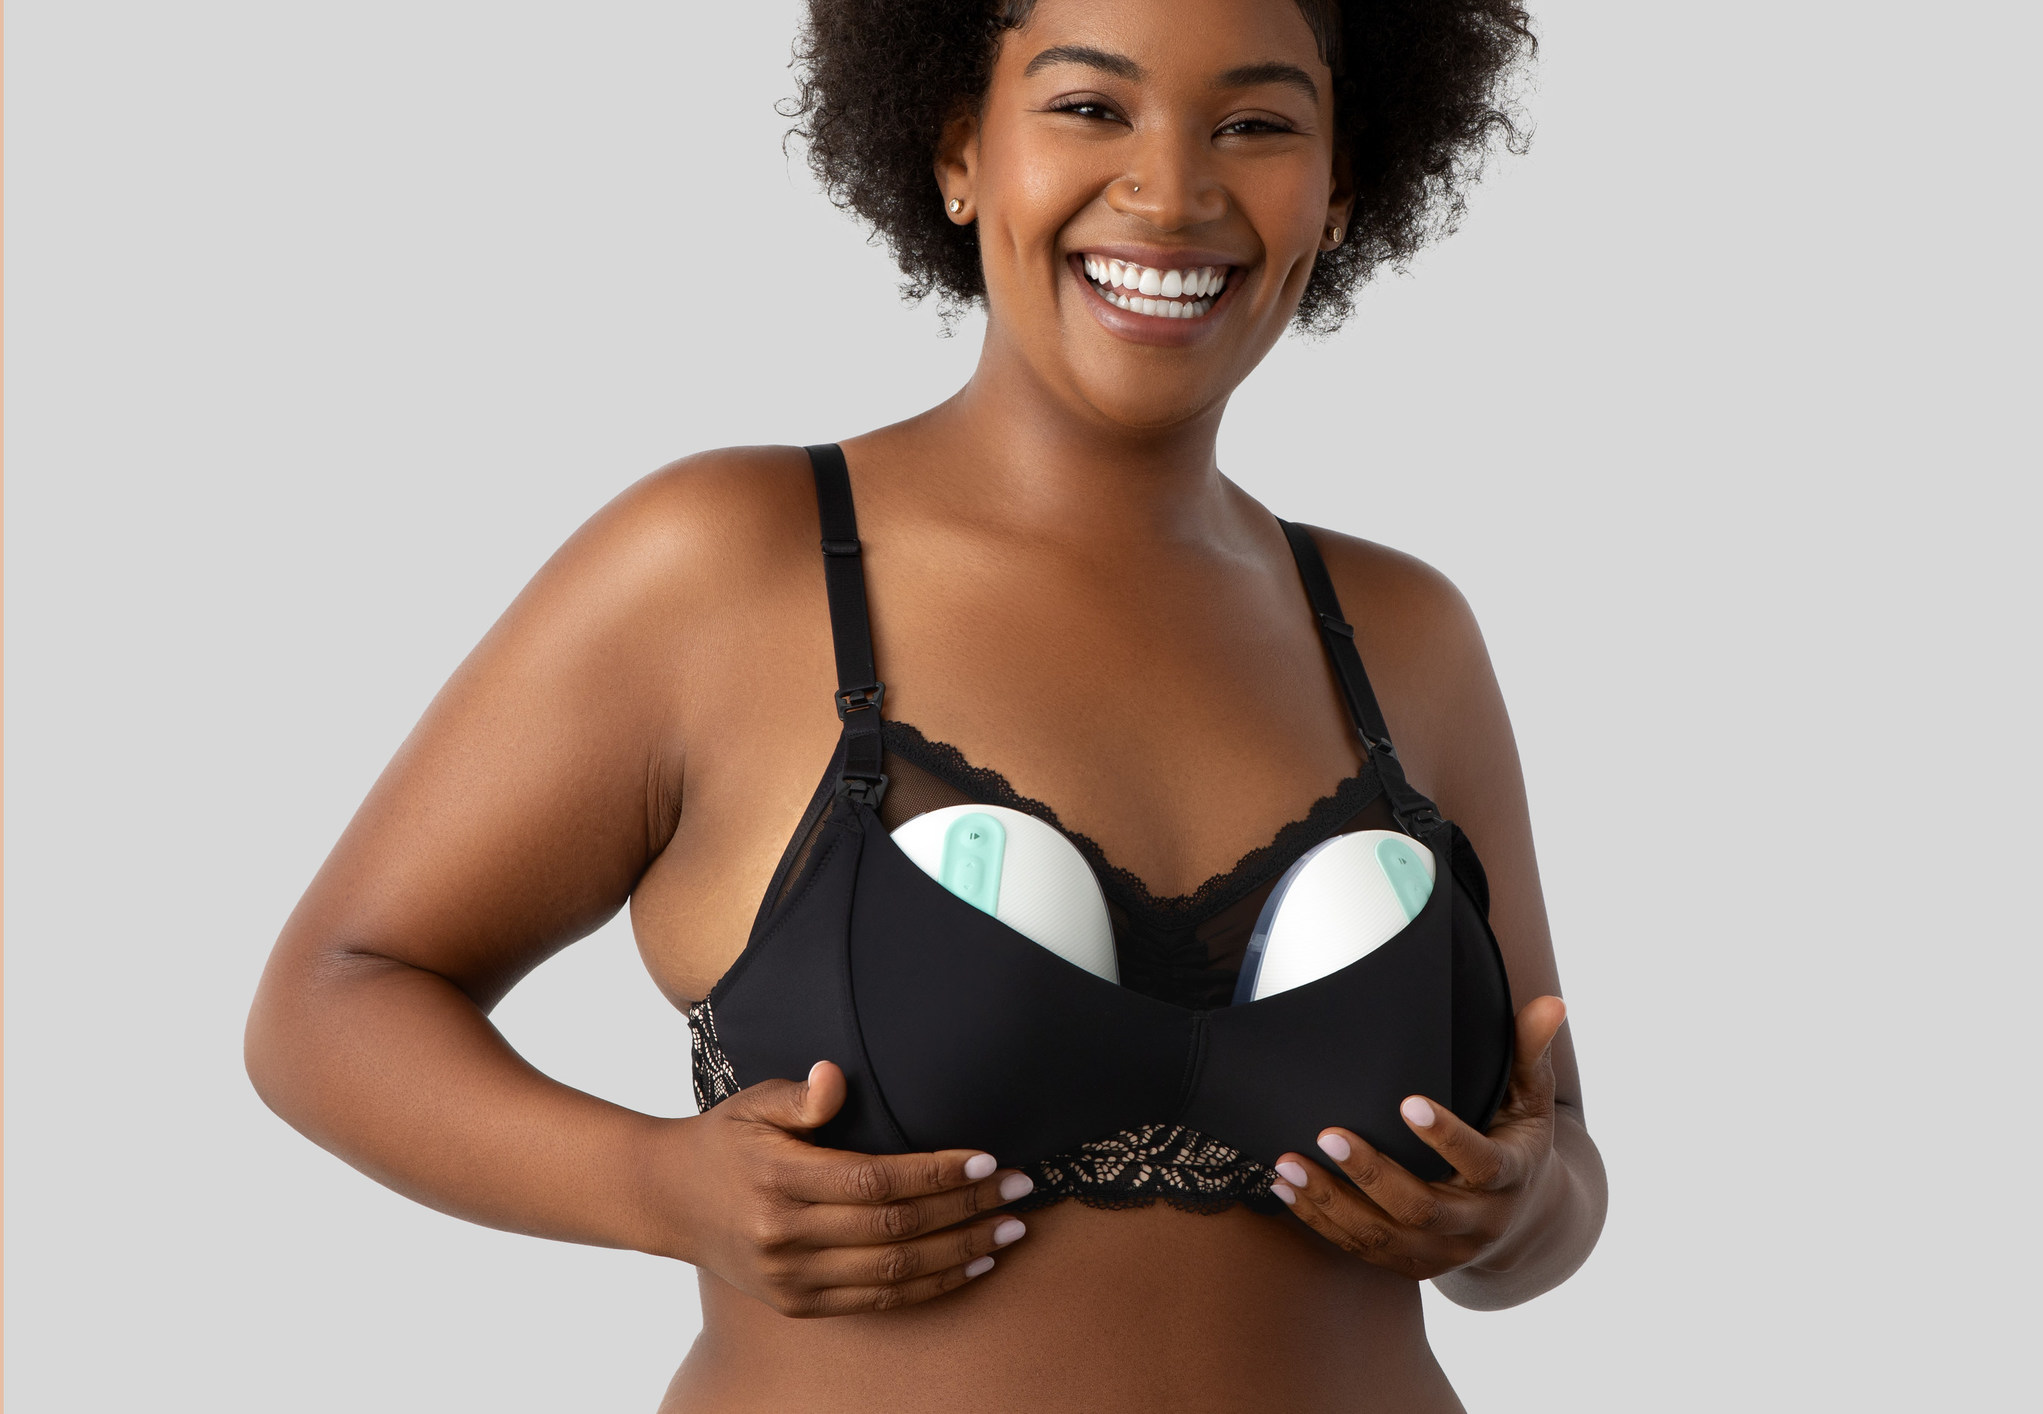 Poll: Do you wear your pumping bra all day, or just change into it when you  pump? : r/ExclusivelyPumping